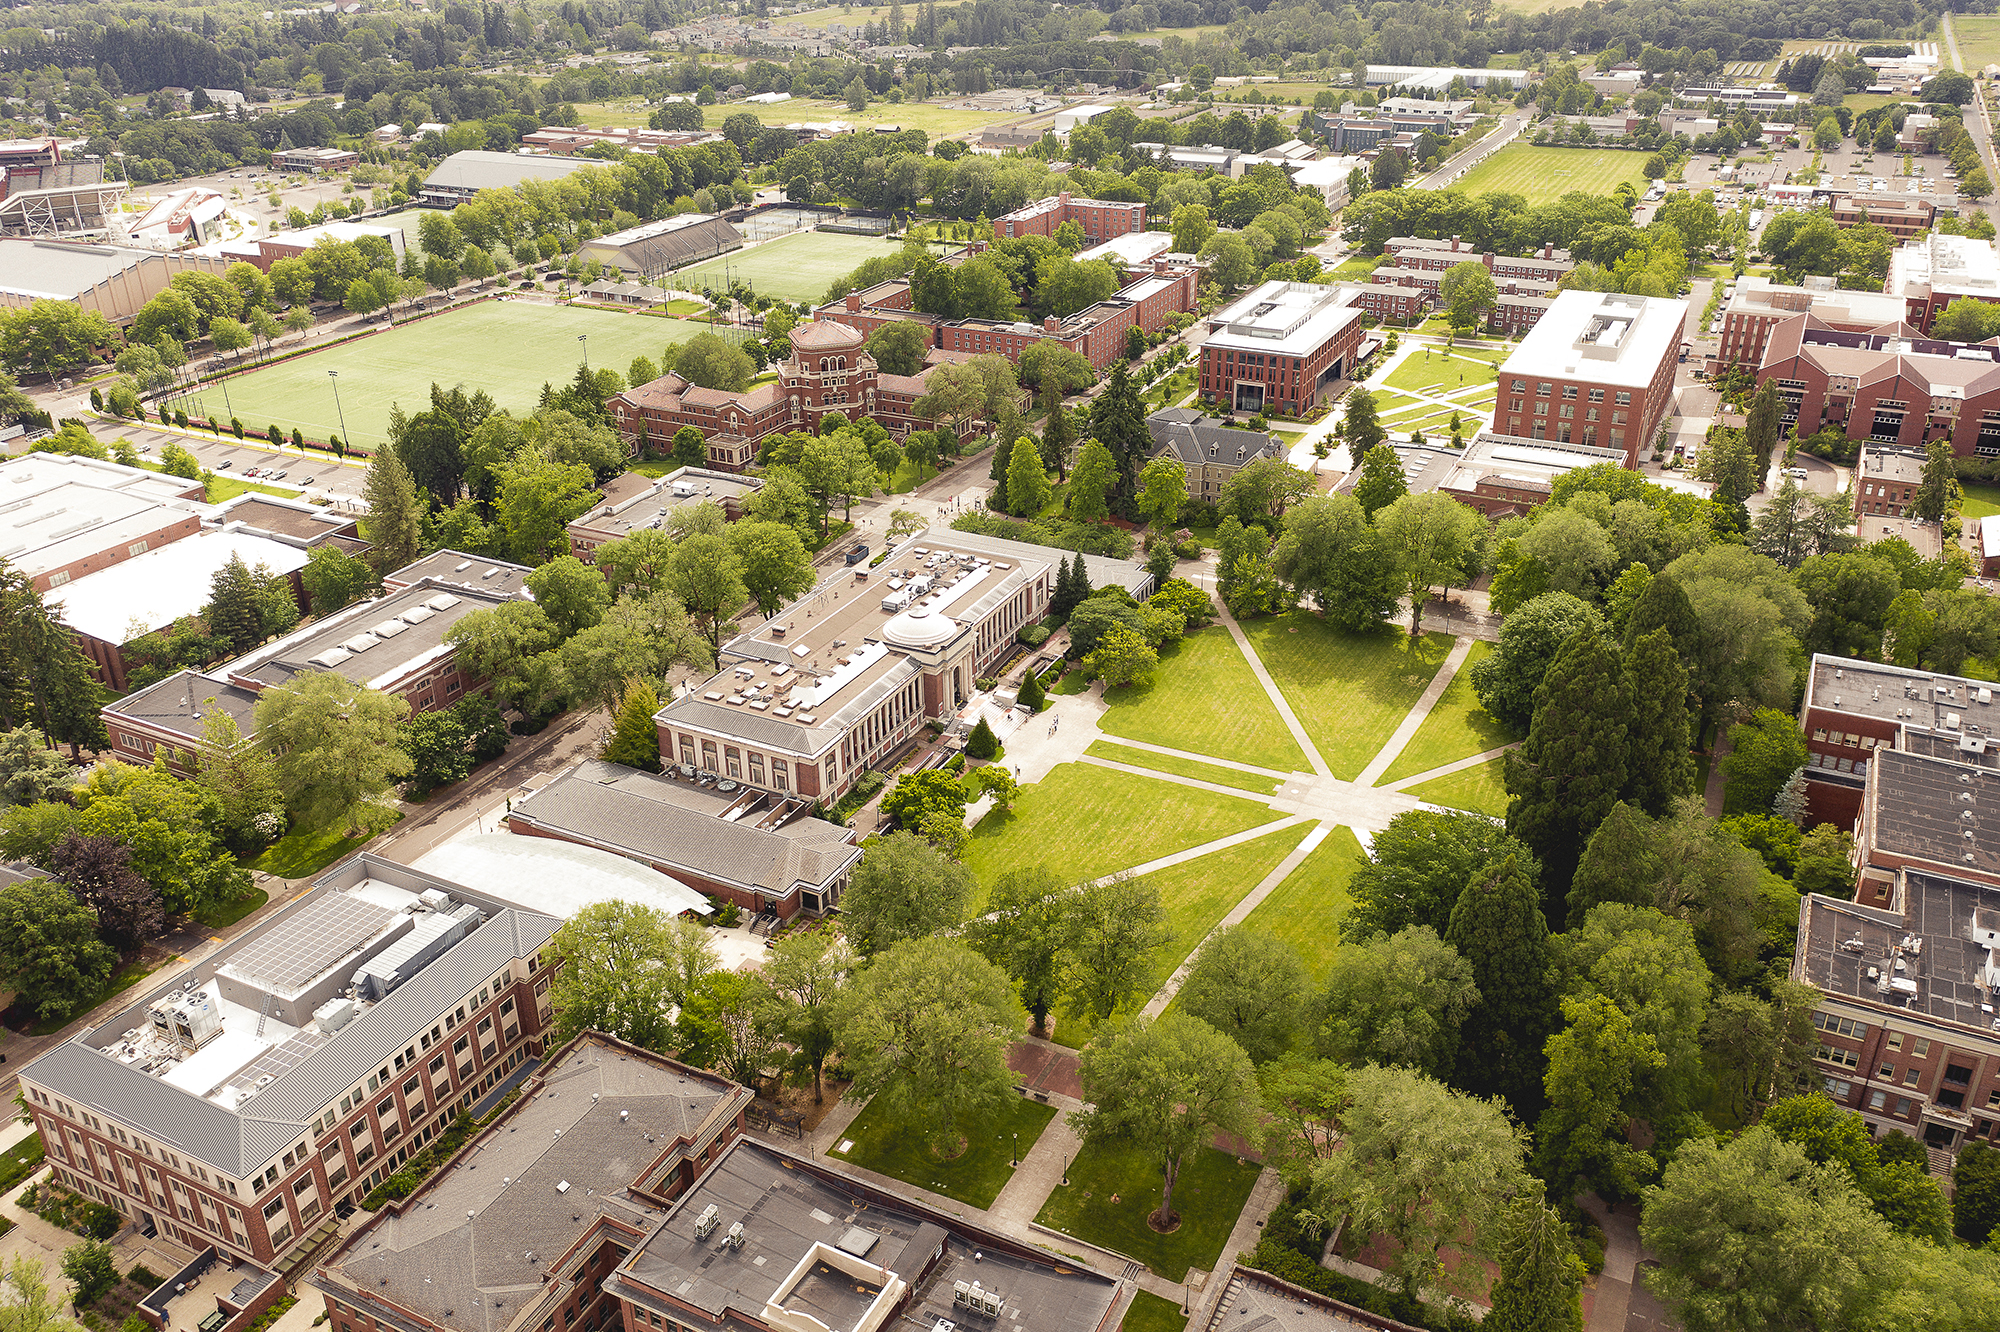 aerial view of the center of OSU Corvallis campus